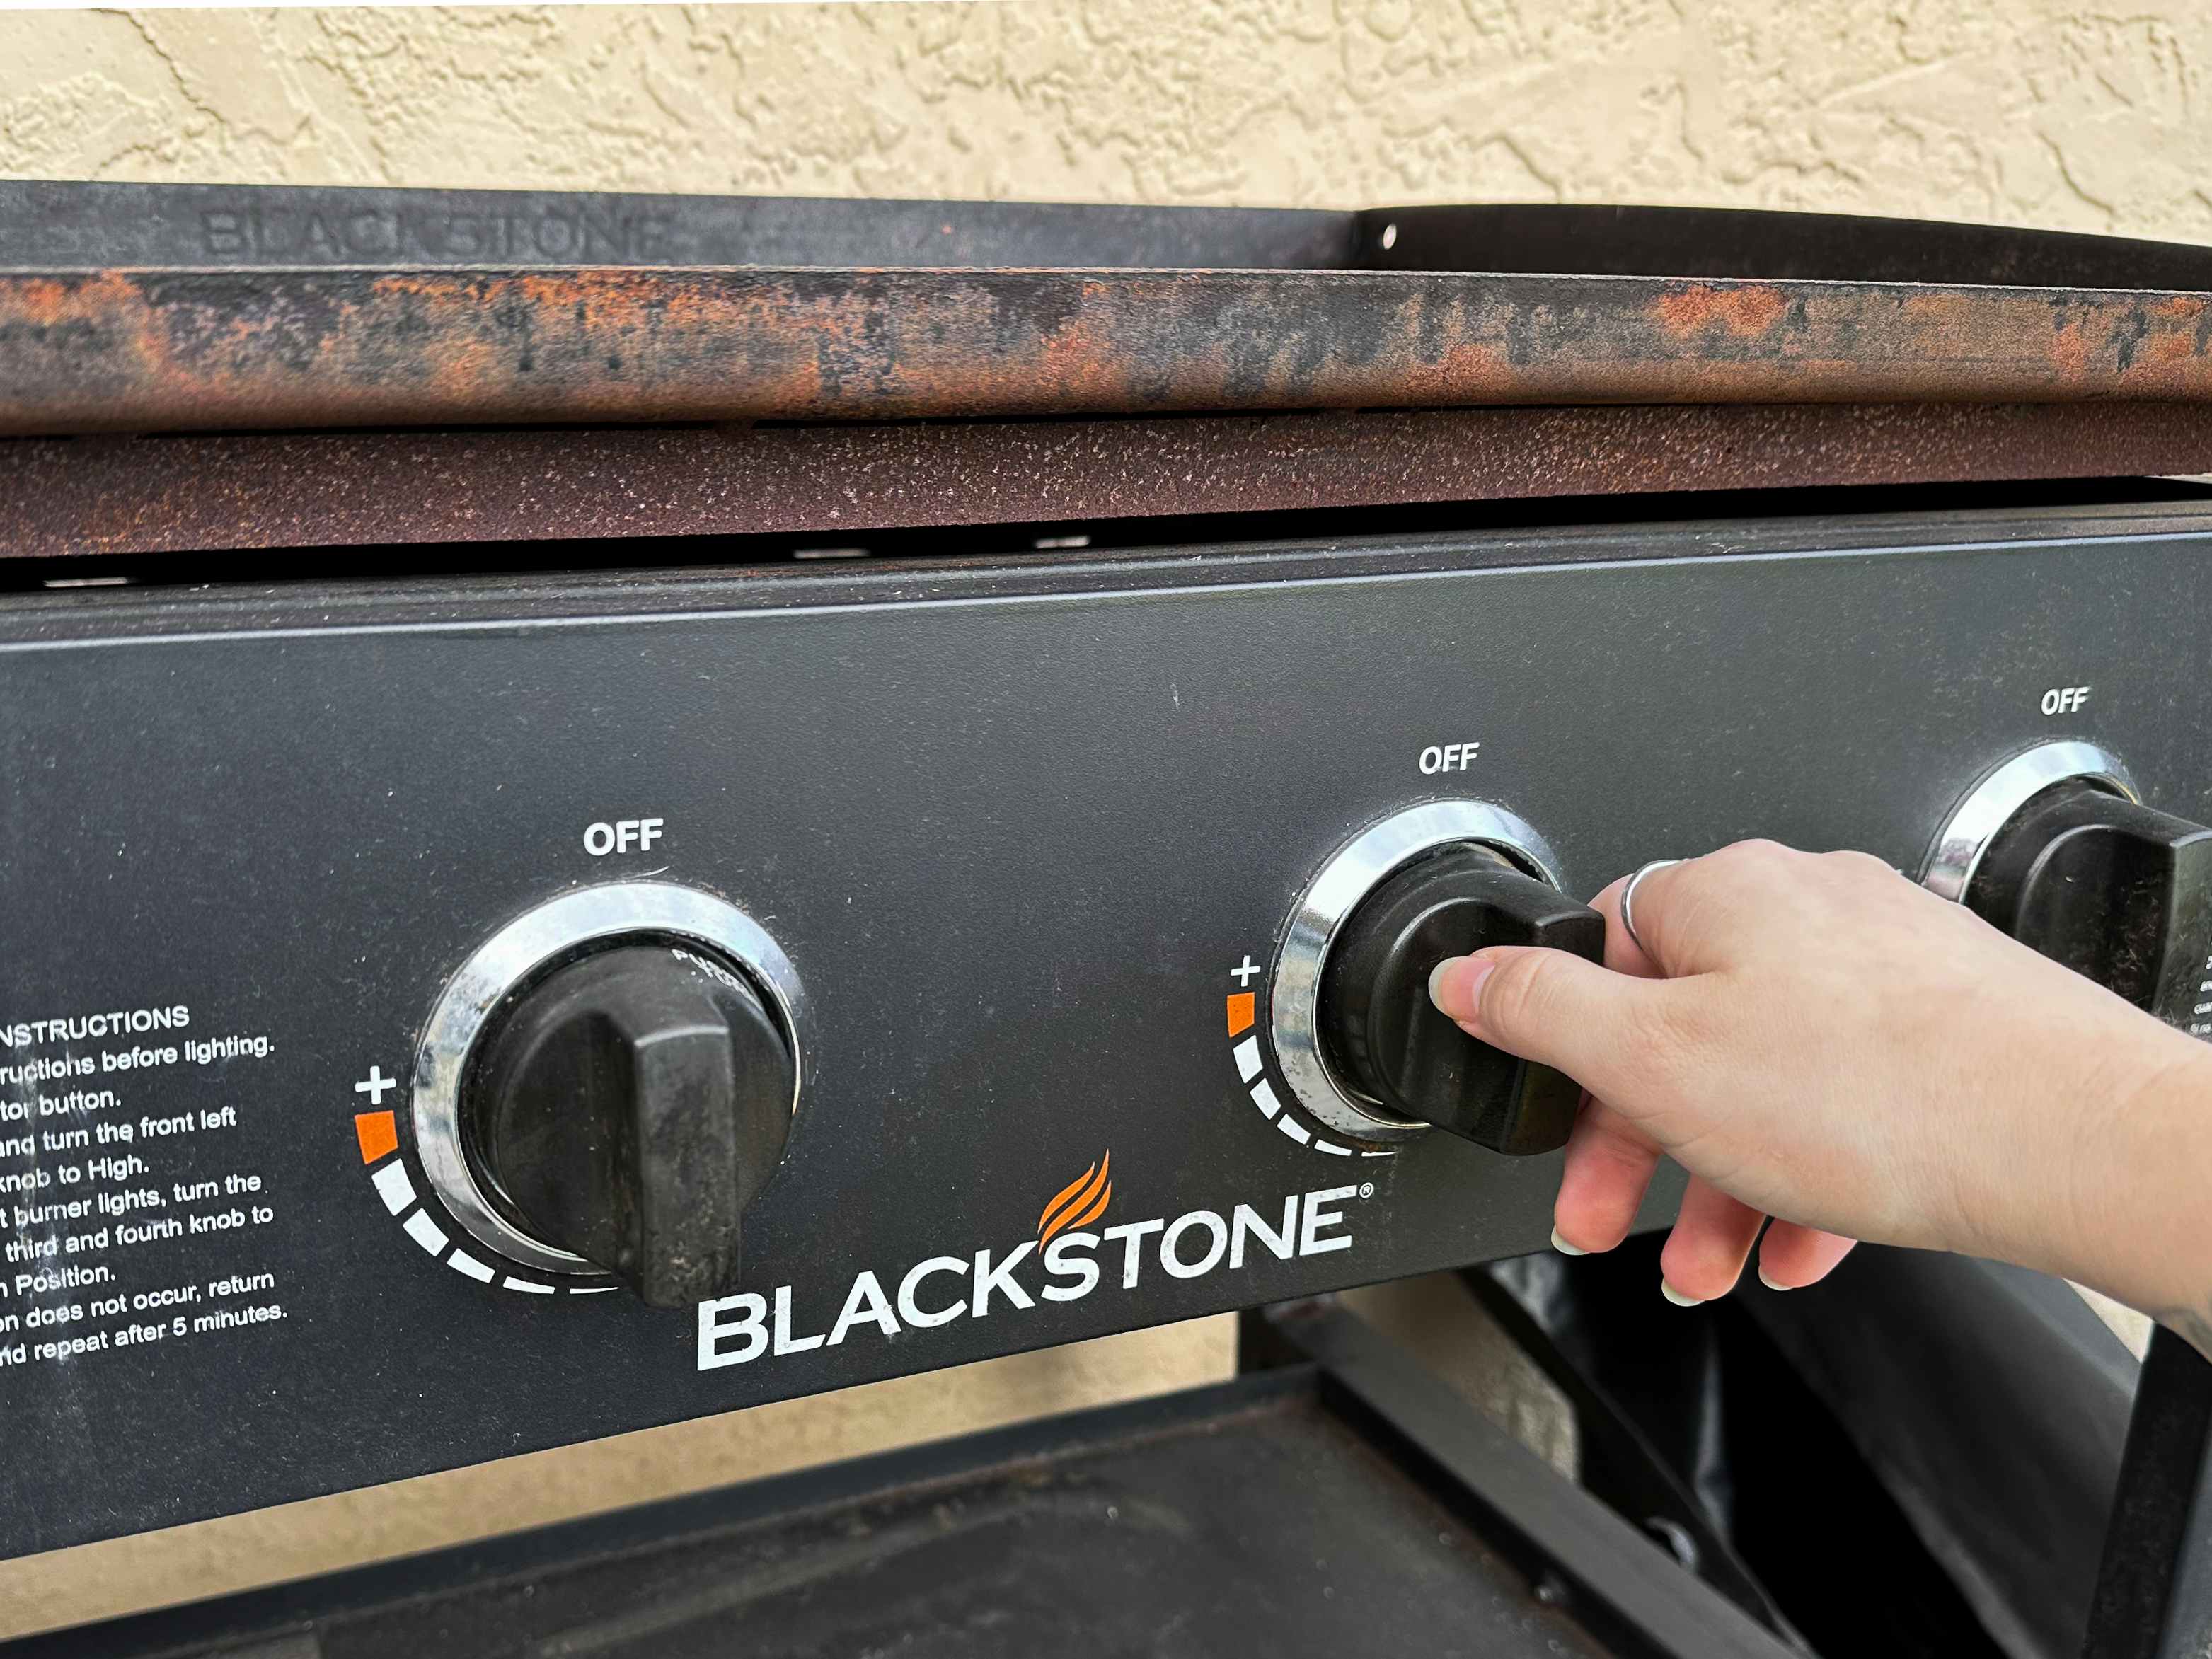 Someone turning on a Blackstone griddle